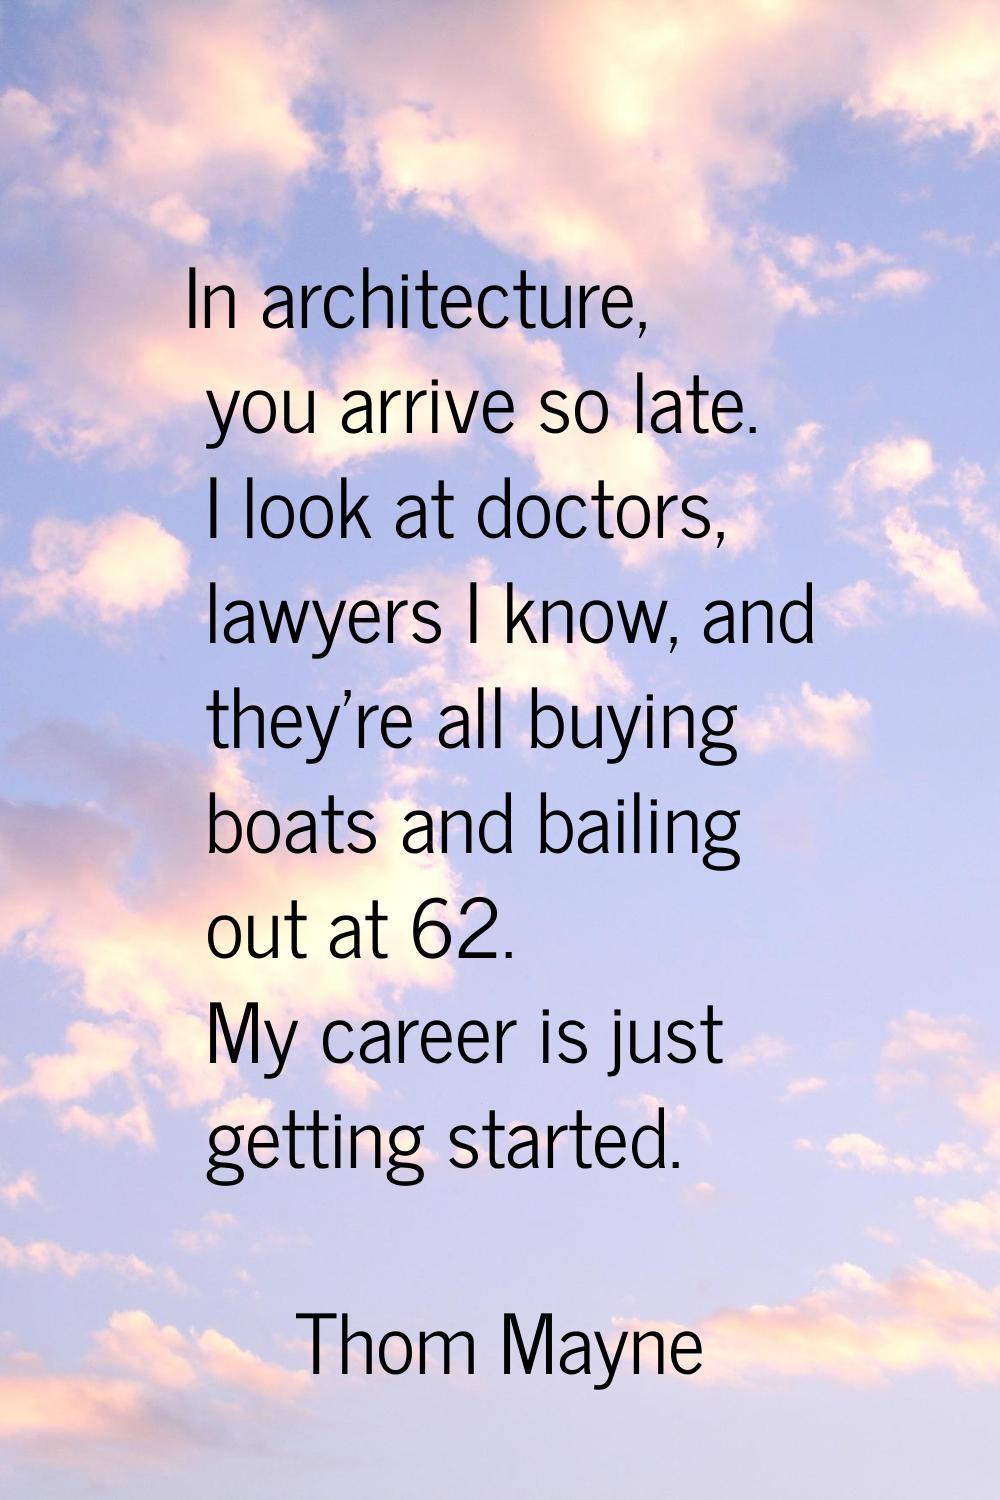 In architecture, you arrive so late. I look at doctors, lawyers I know, and they're all buying boat